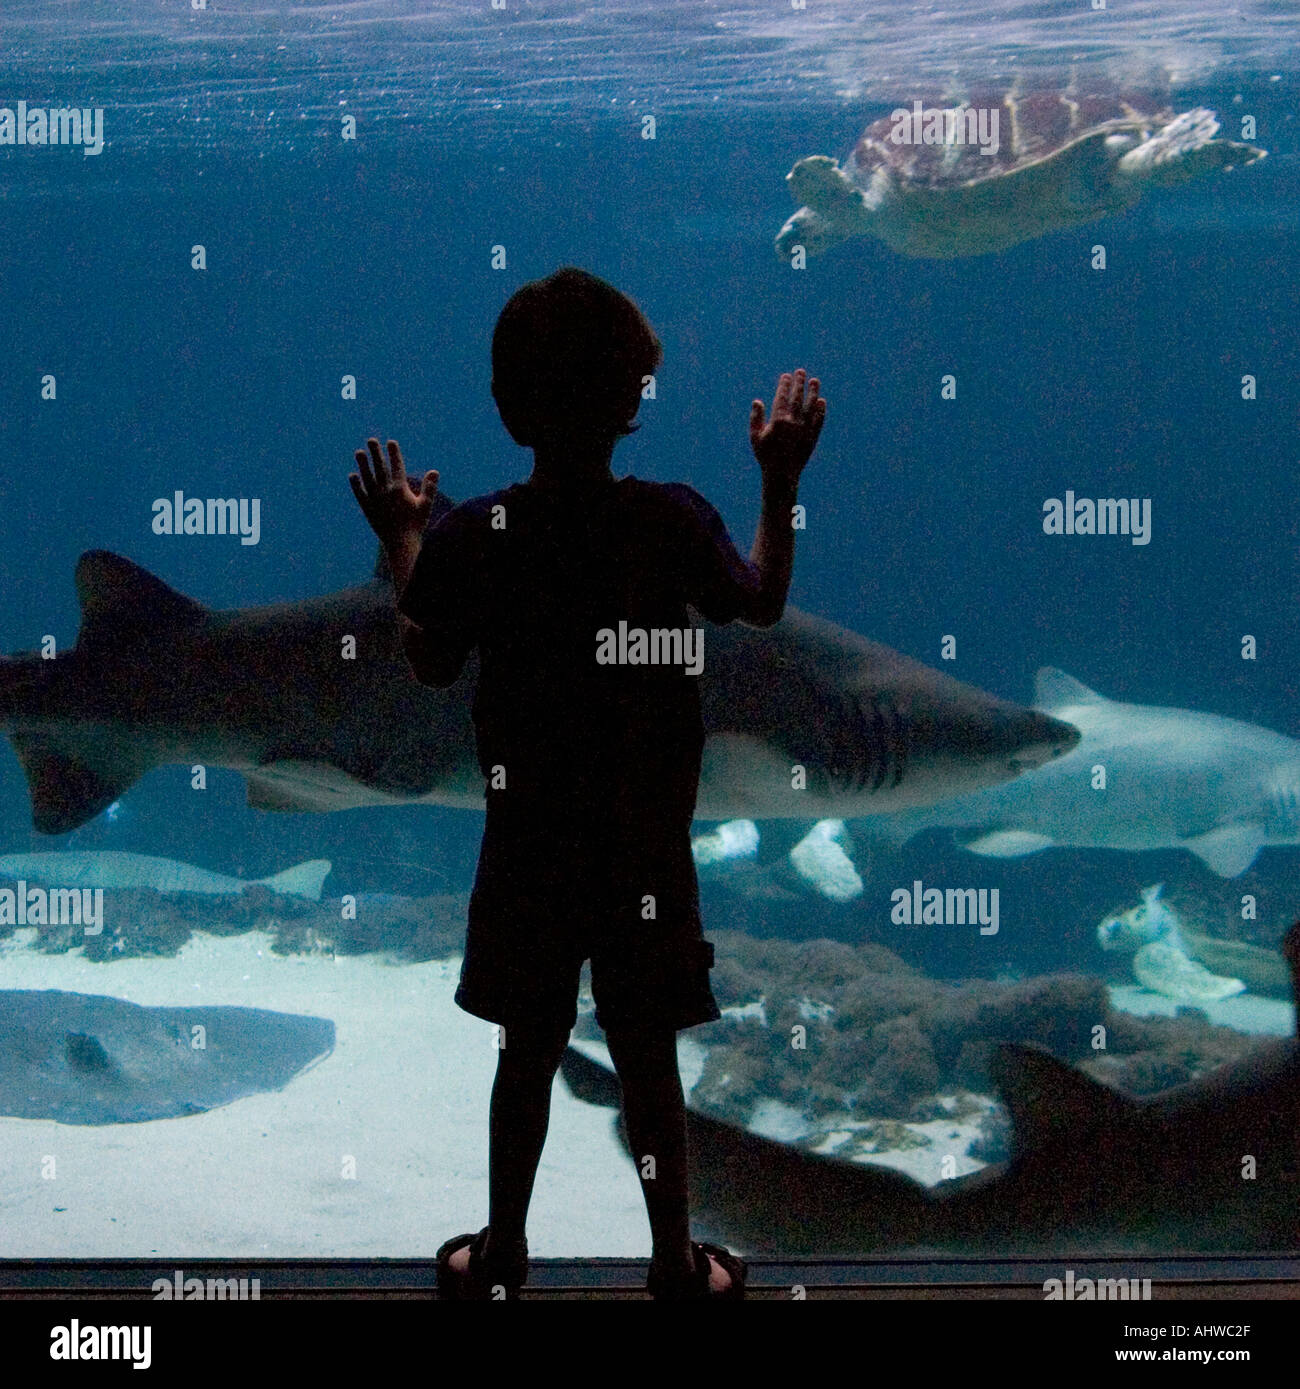 silhouette of young boy at New York Aquarium Stock Photo